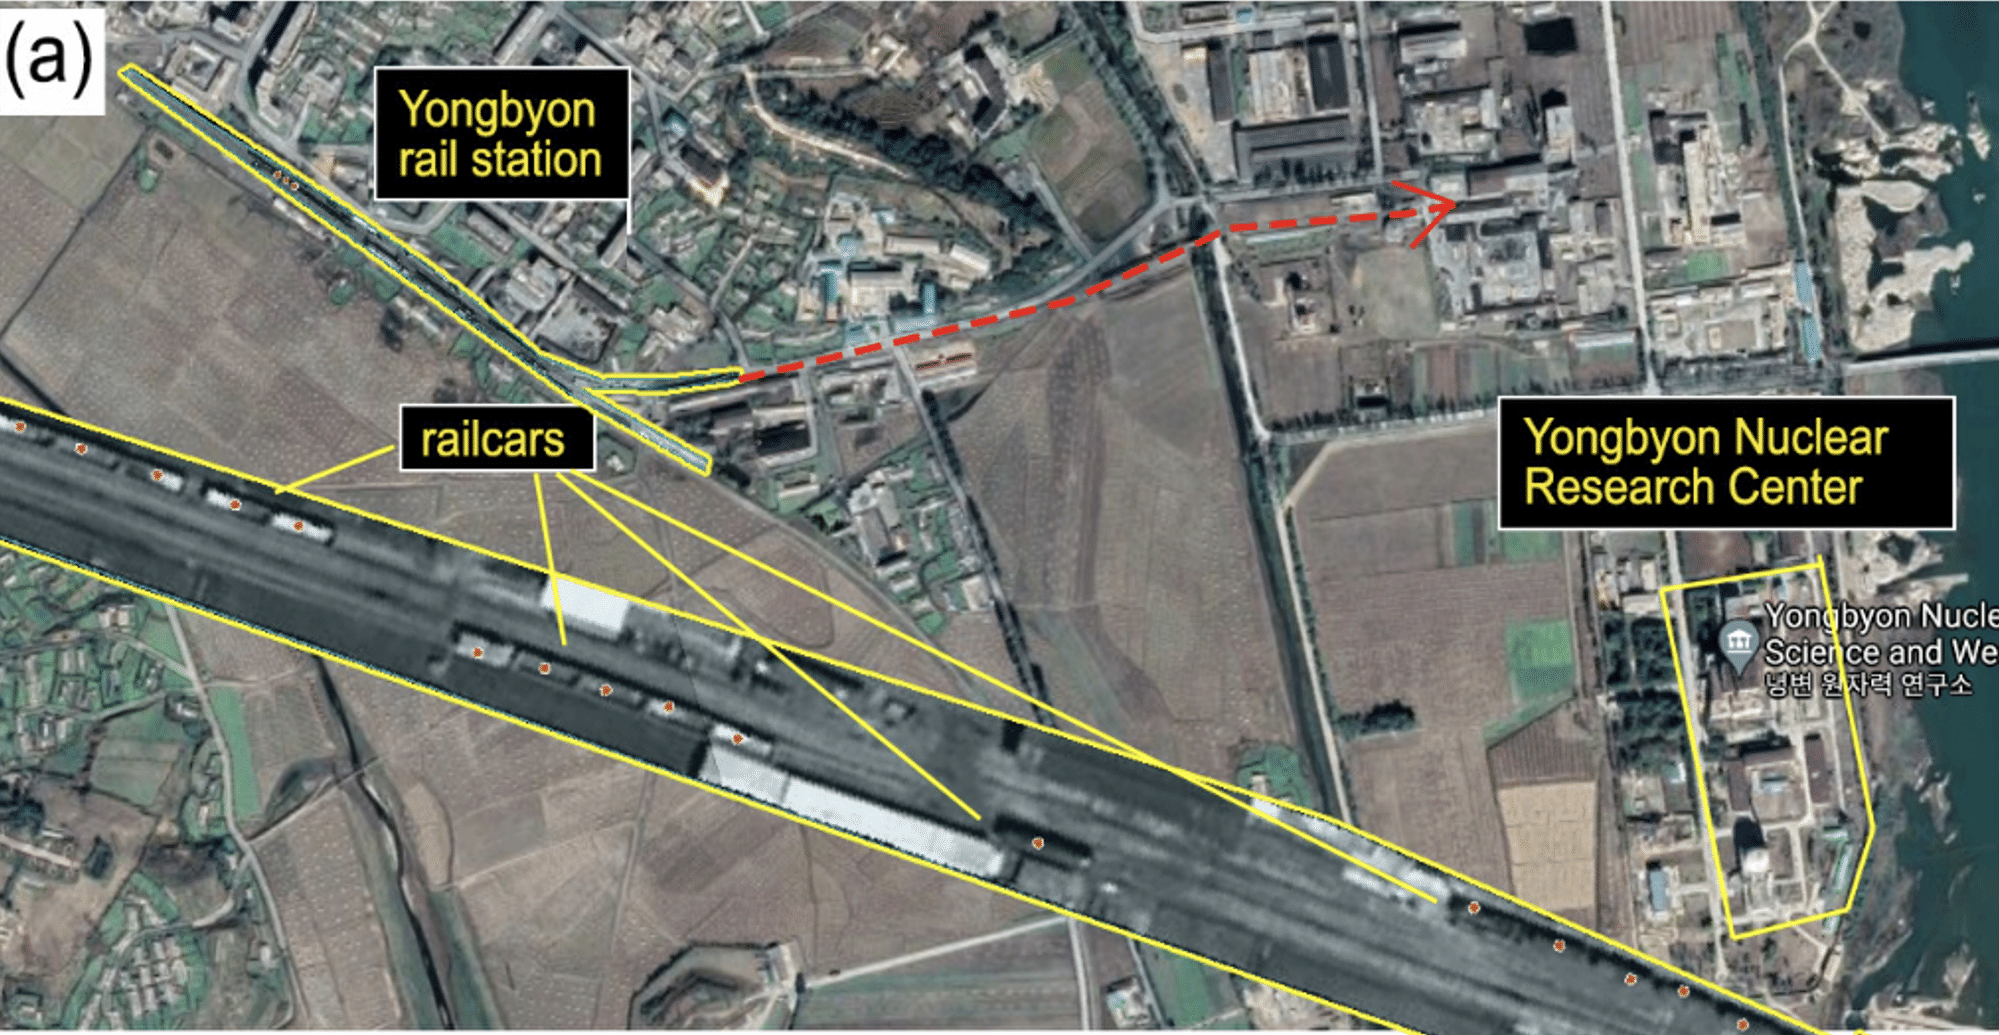 https://thebulletin.org/wp-content/uploads/2022/01/Yongbyon-Nuclear-Research-Center-150x150.png